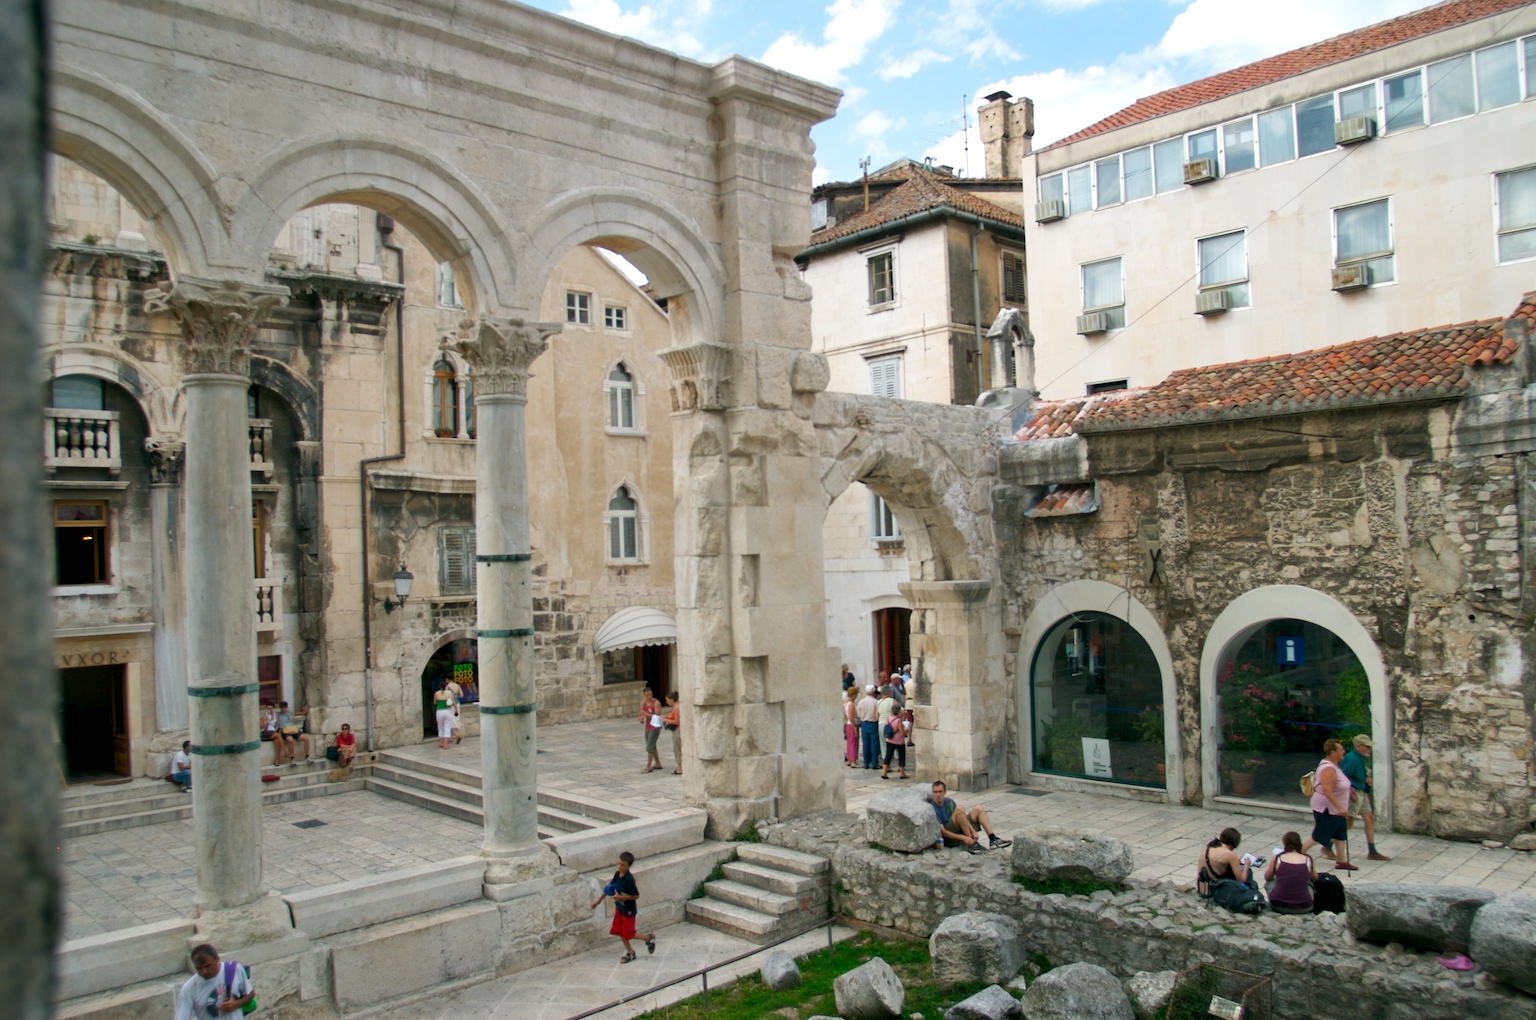  Diocletian’s Palace